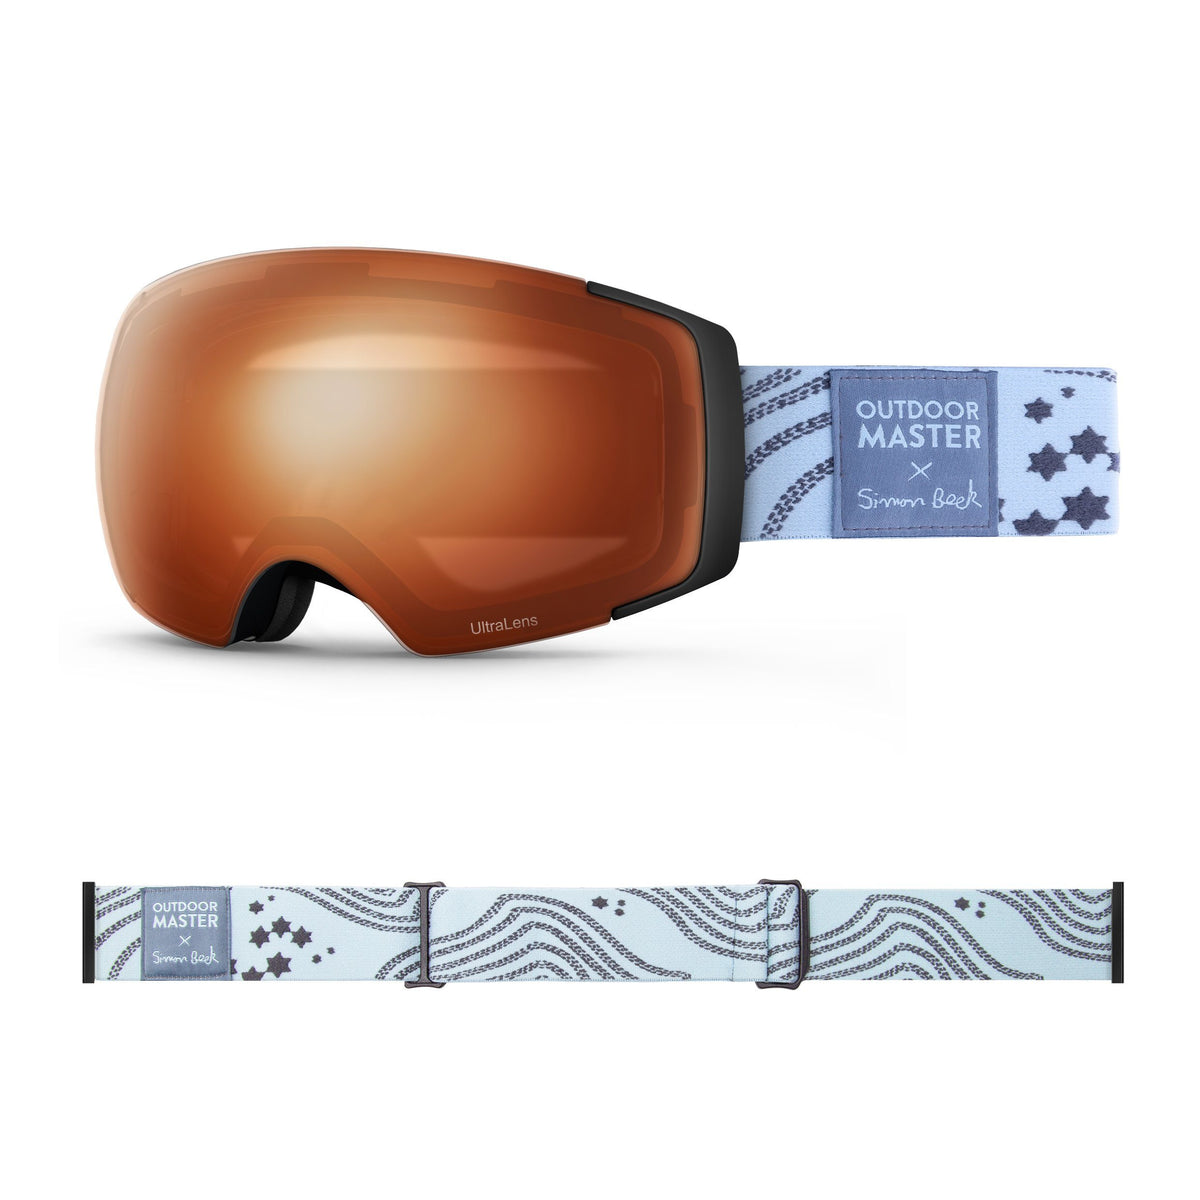 OutdoorMaster x Simon Beck Ski Goggles Pro Series - Snowshoeing Art Limited Edition OutdoorMaster UltraLens VLT 29% Optimized Orange Star Road-Lightsteelblue